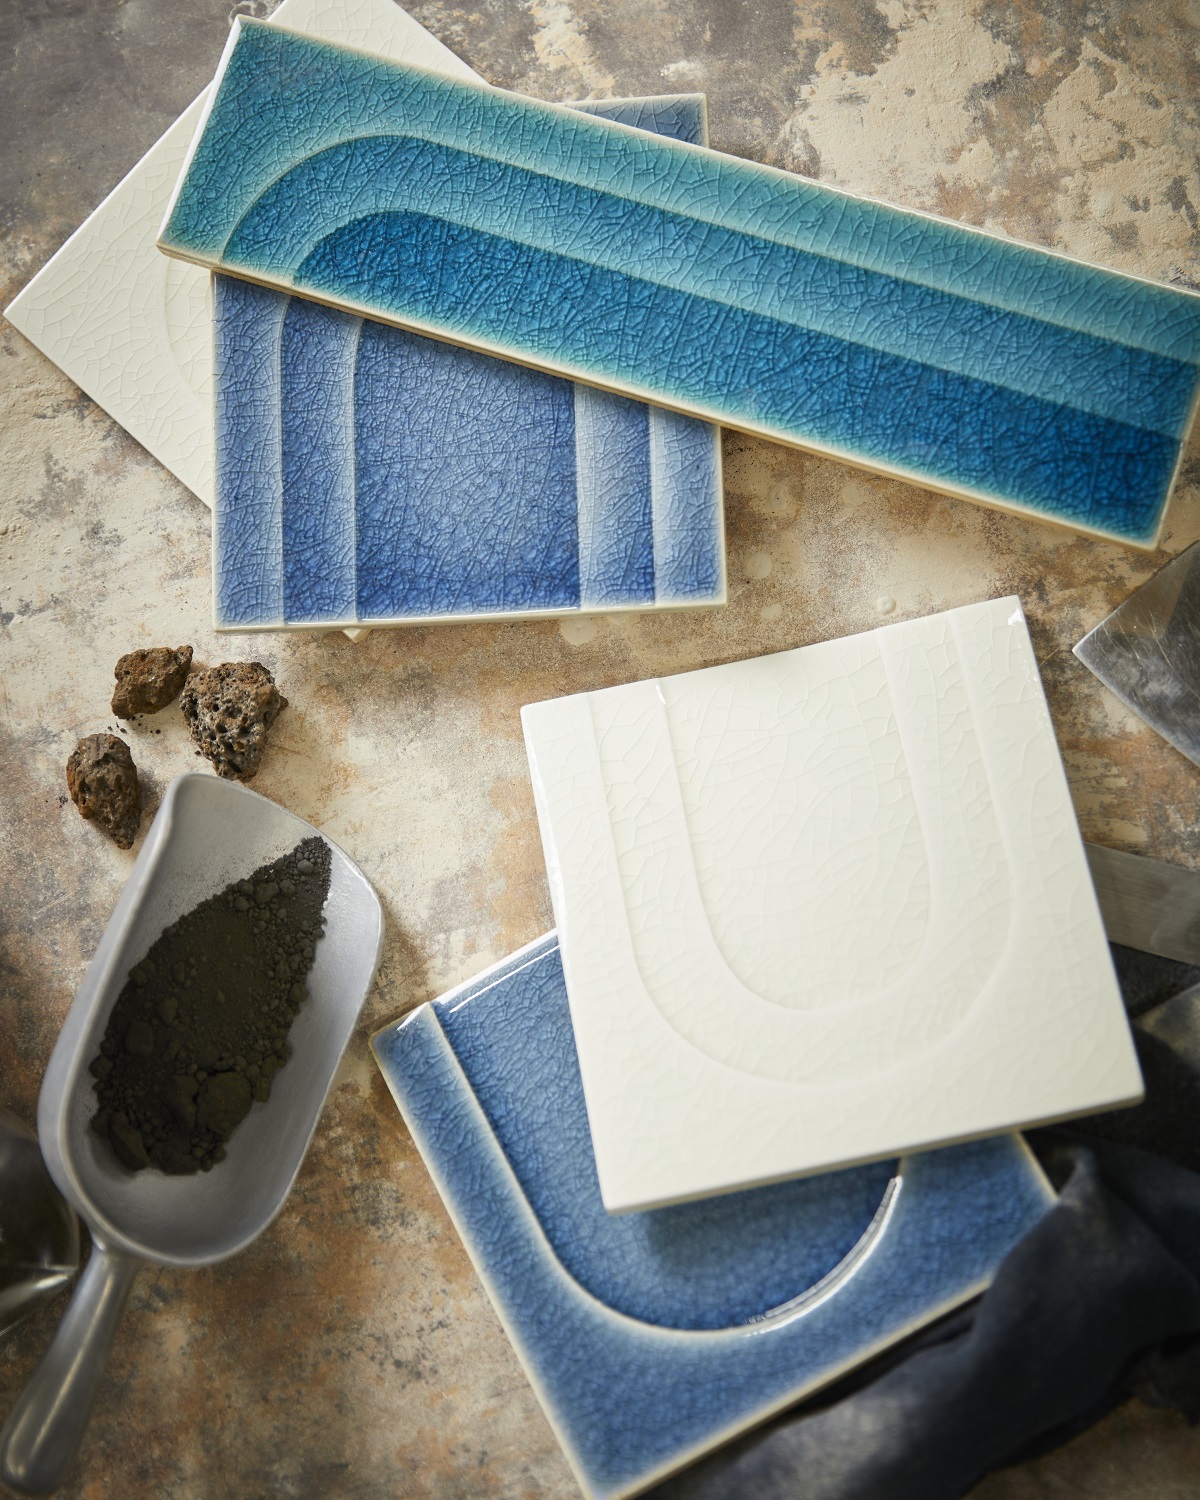 tiles from sustainable materials made by Kohler designed by Debs